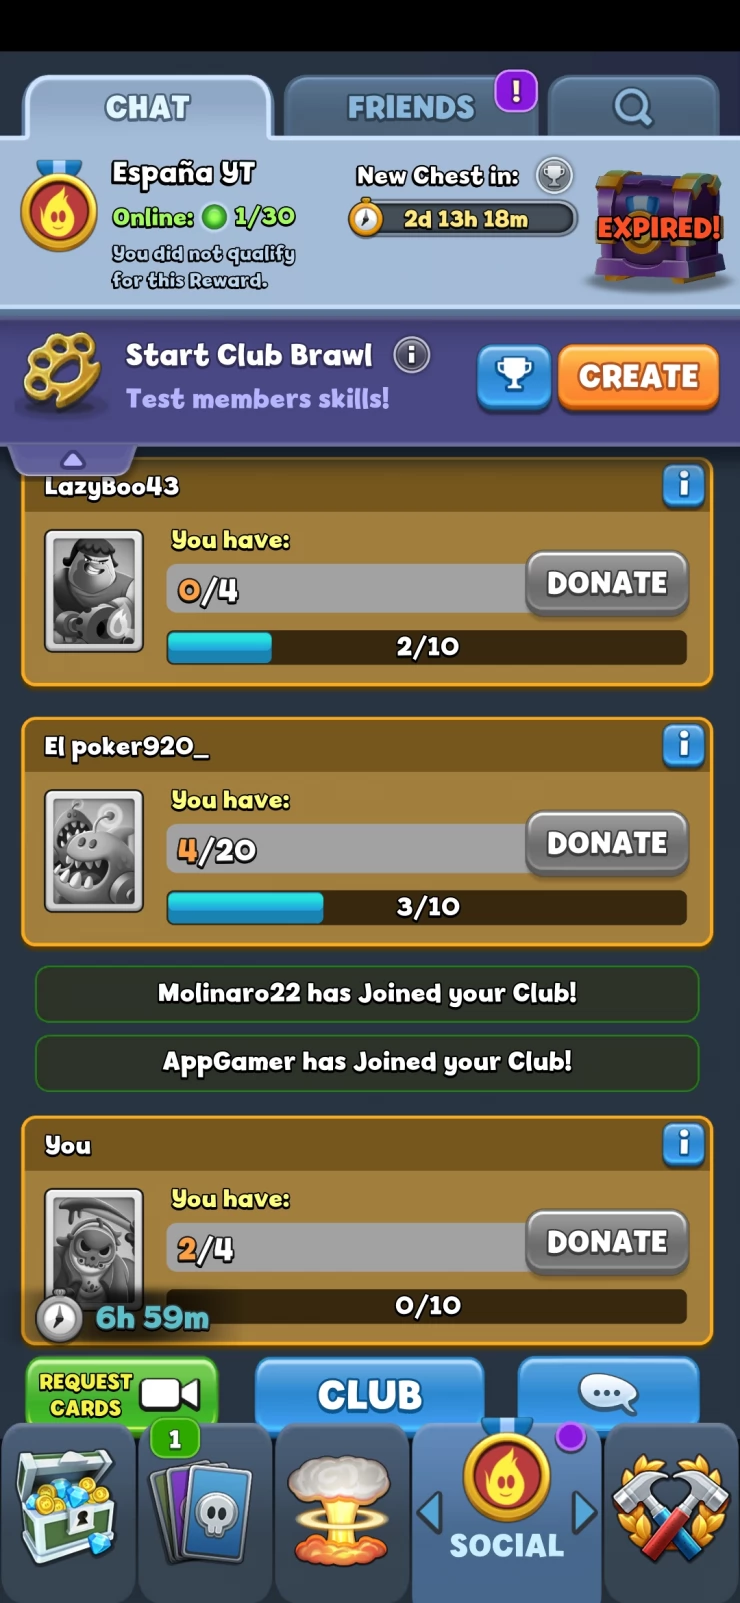 Join a Club to Request Cards and Donate Cards